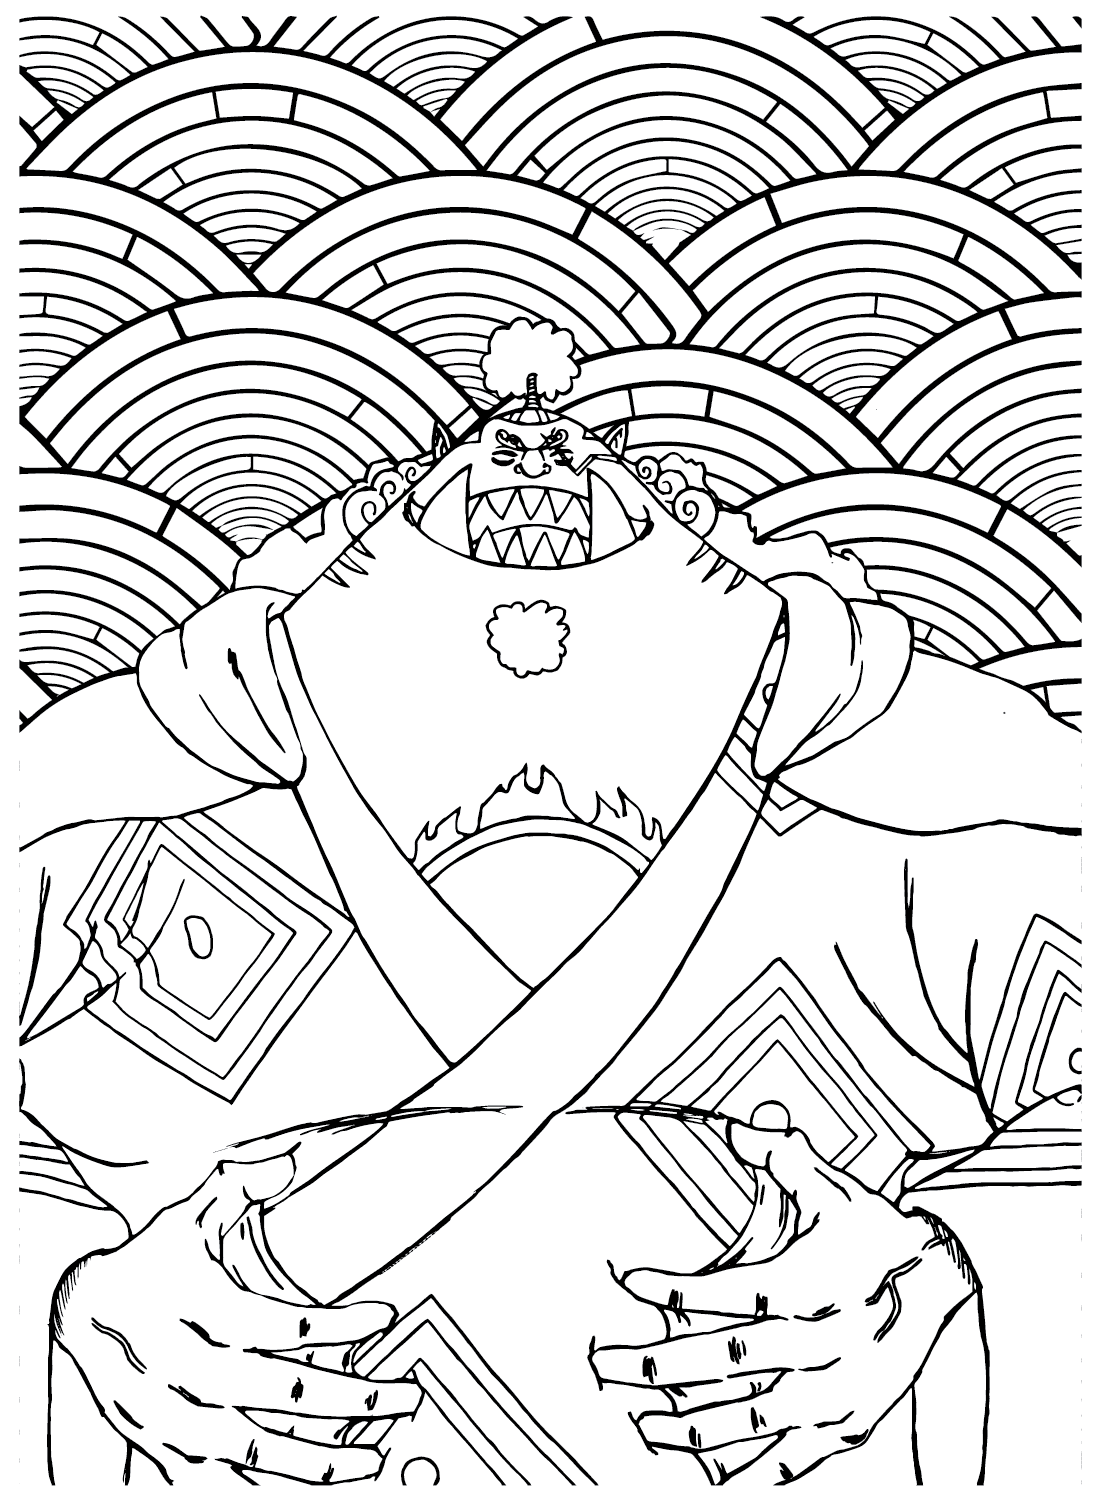 Free Printable Jinbe Coloring Page from Jinbe